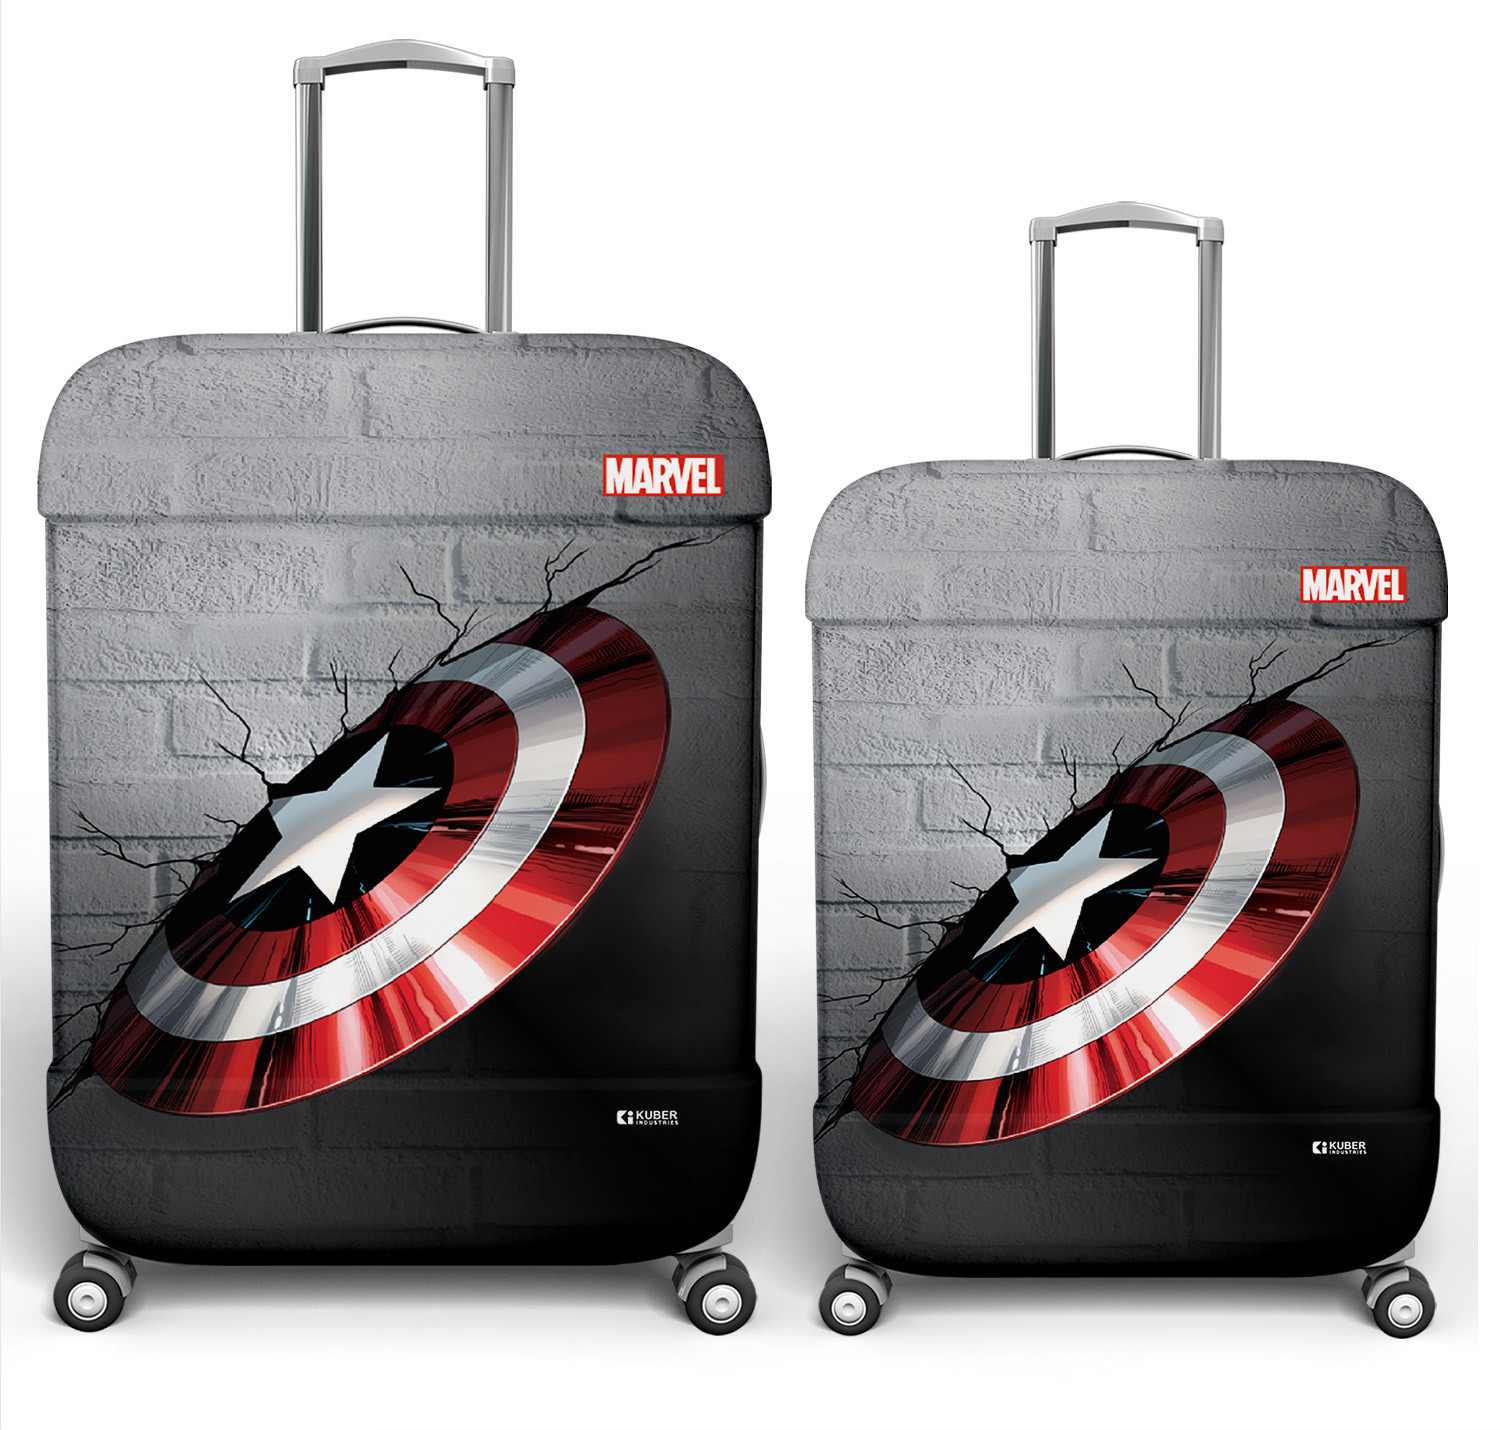 Kuber Industries Marvel Captain America Shield Luggage Cover|Polyester Travel Suitcase Cover|Washable|Stretchable Suitcase Cover|18-22 Inch-Small|22-26 Inch-Medium|Pack of 2 (Gray)